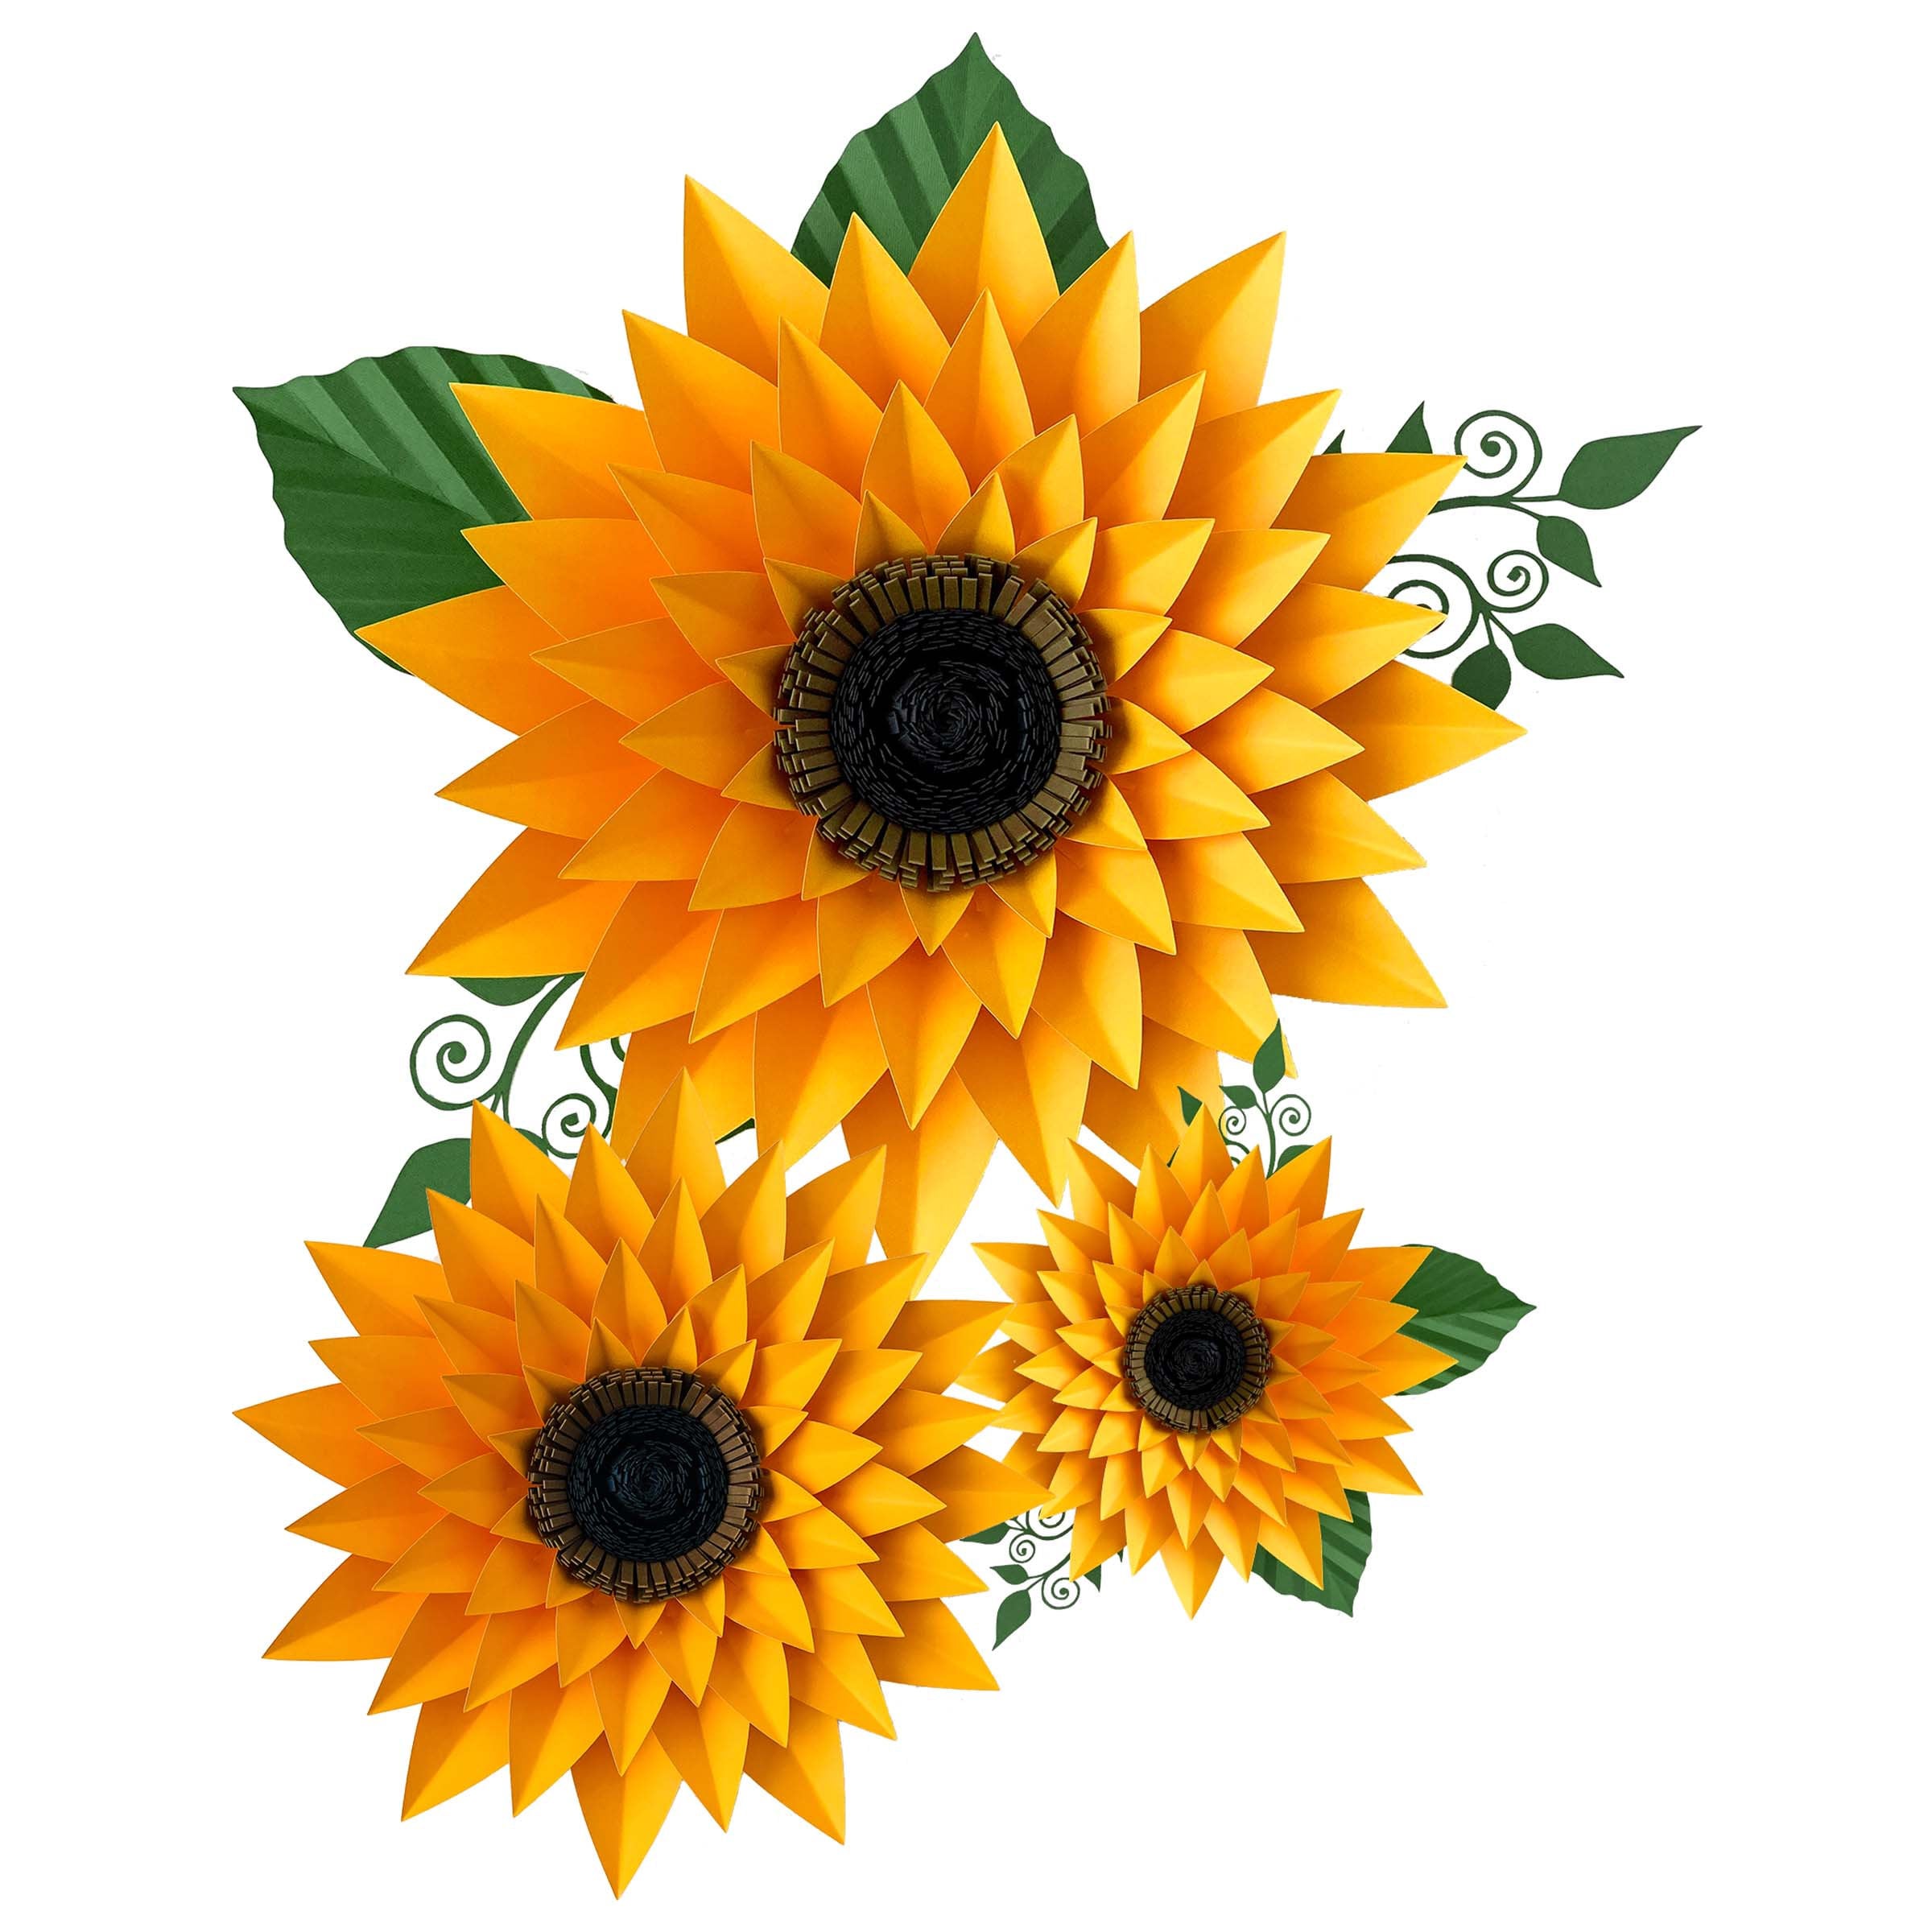 Download Svg Dxf Png Petal 44 Sunflower Paper Flower Template Diy Cricut And Silhouette Machines Ready 2 Center Components Included Paper Flowers